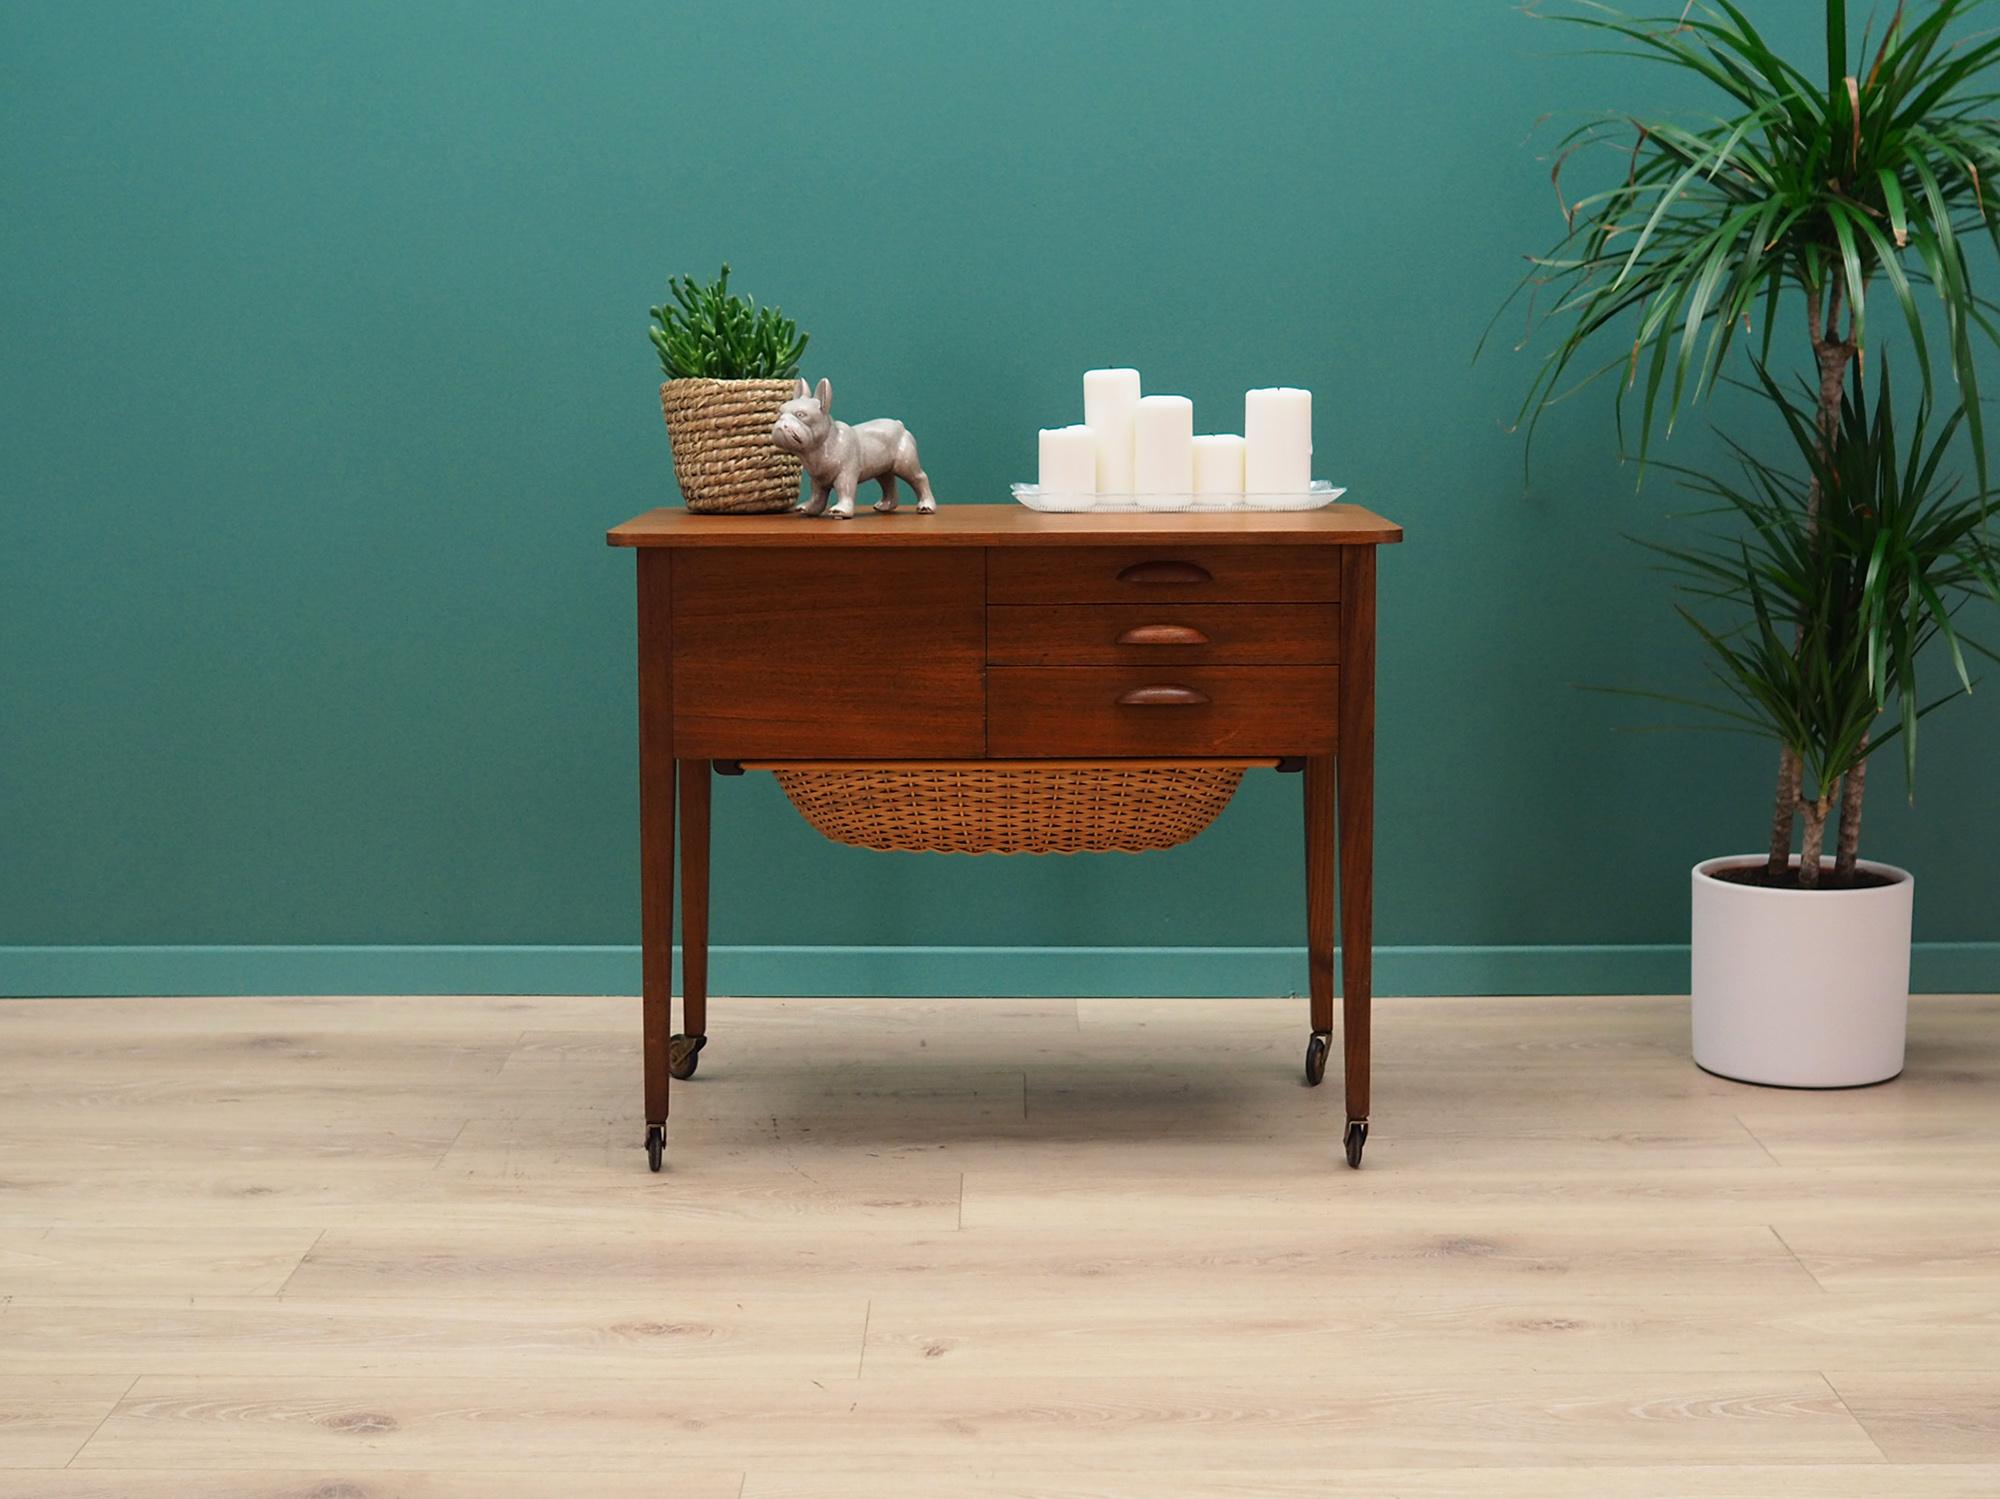 Fantastic sewing table from the 1960s-1970s. Danish design, Minimalist form. Surface covered with teak veneer, legs made of solid teak wood. The furniture has three drawers on the front and one on the side. Additionally, a rattan basket is mounted